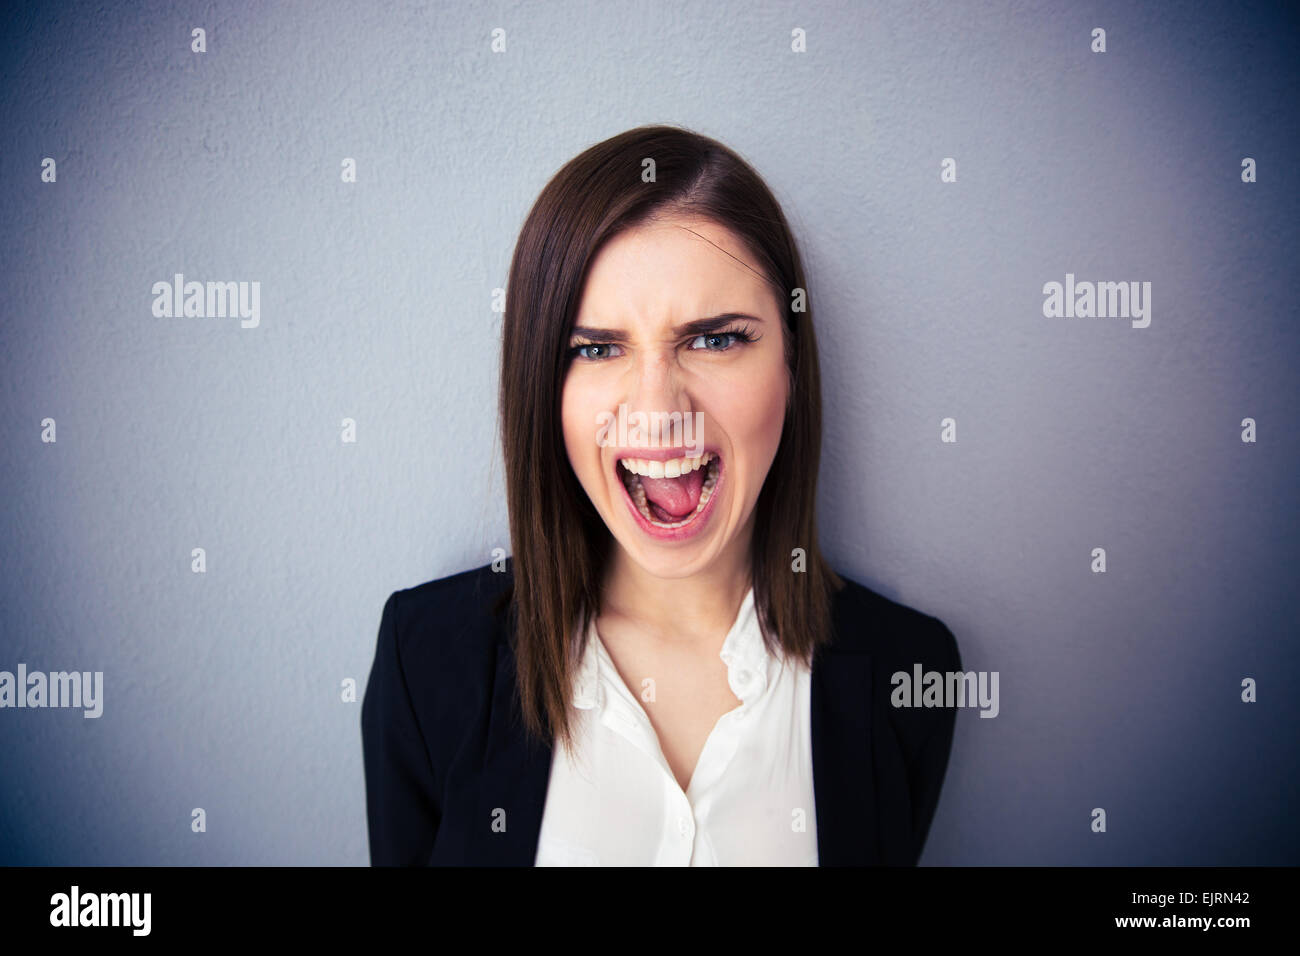 Angry businesswoman shouting over gray background. Looking at camera Stock Photo